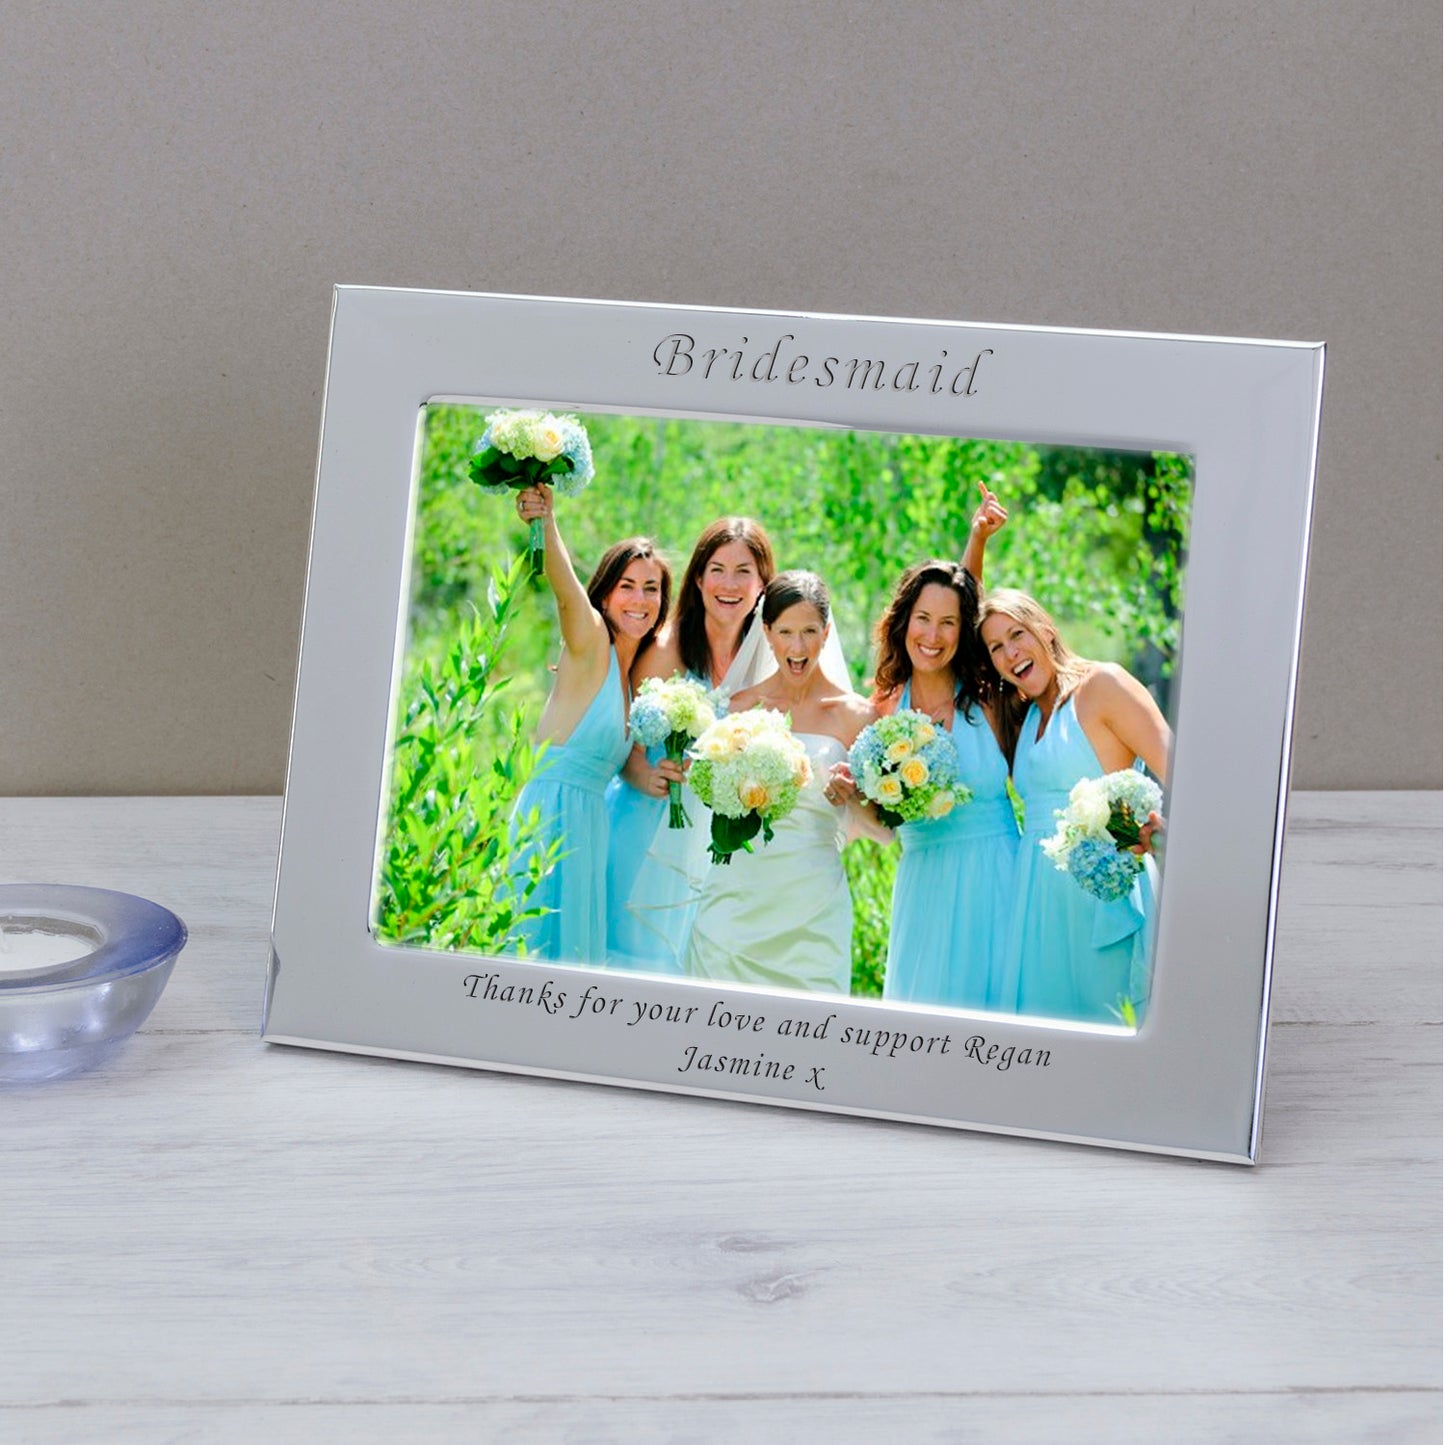 Personalised Bridesmaid Silver Plated Photo Frame